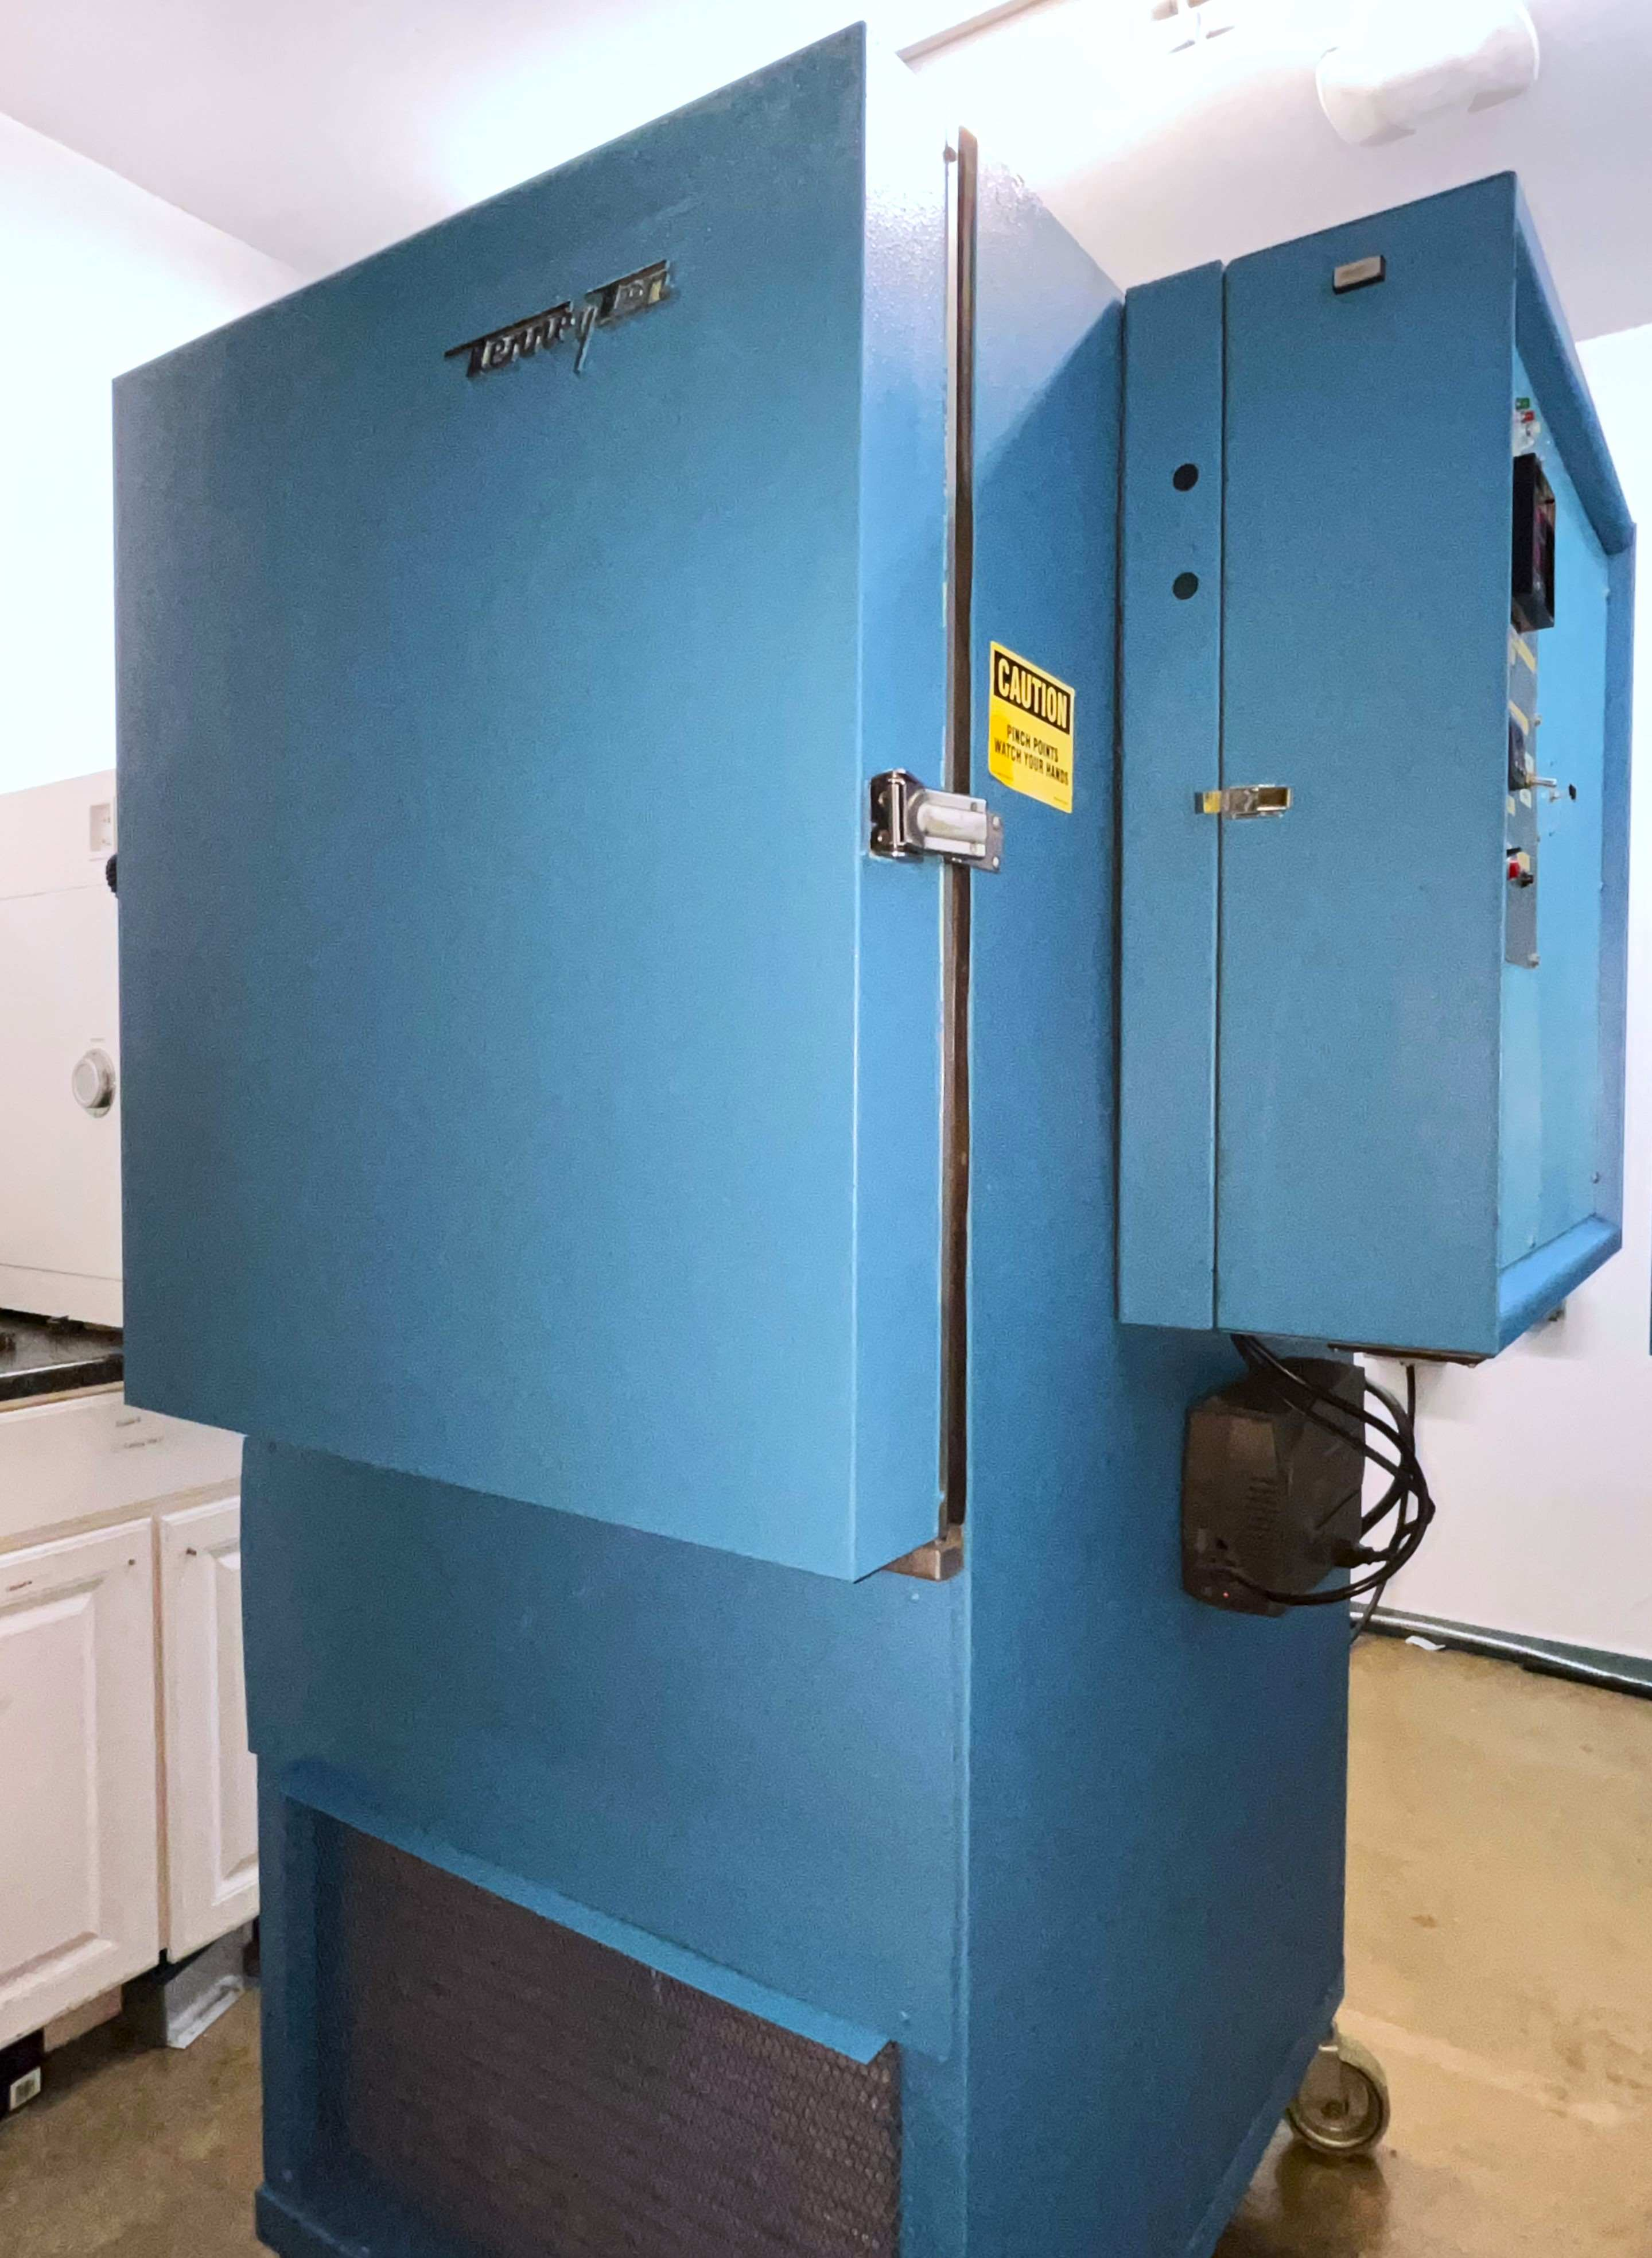 Fully Working Tenney Ten Environmental Chamber (-35C to +170C, 10 cu. ft.) with Warranty